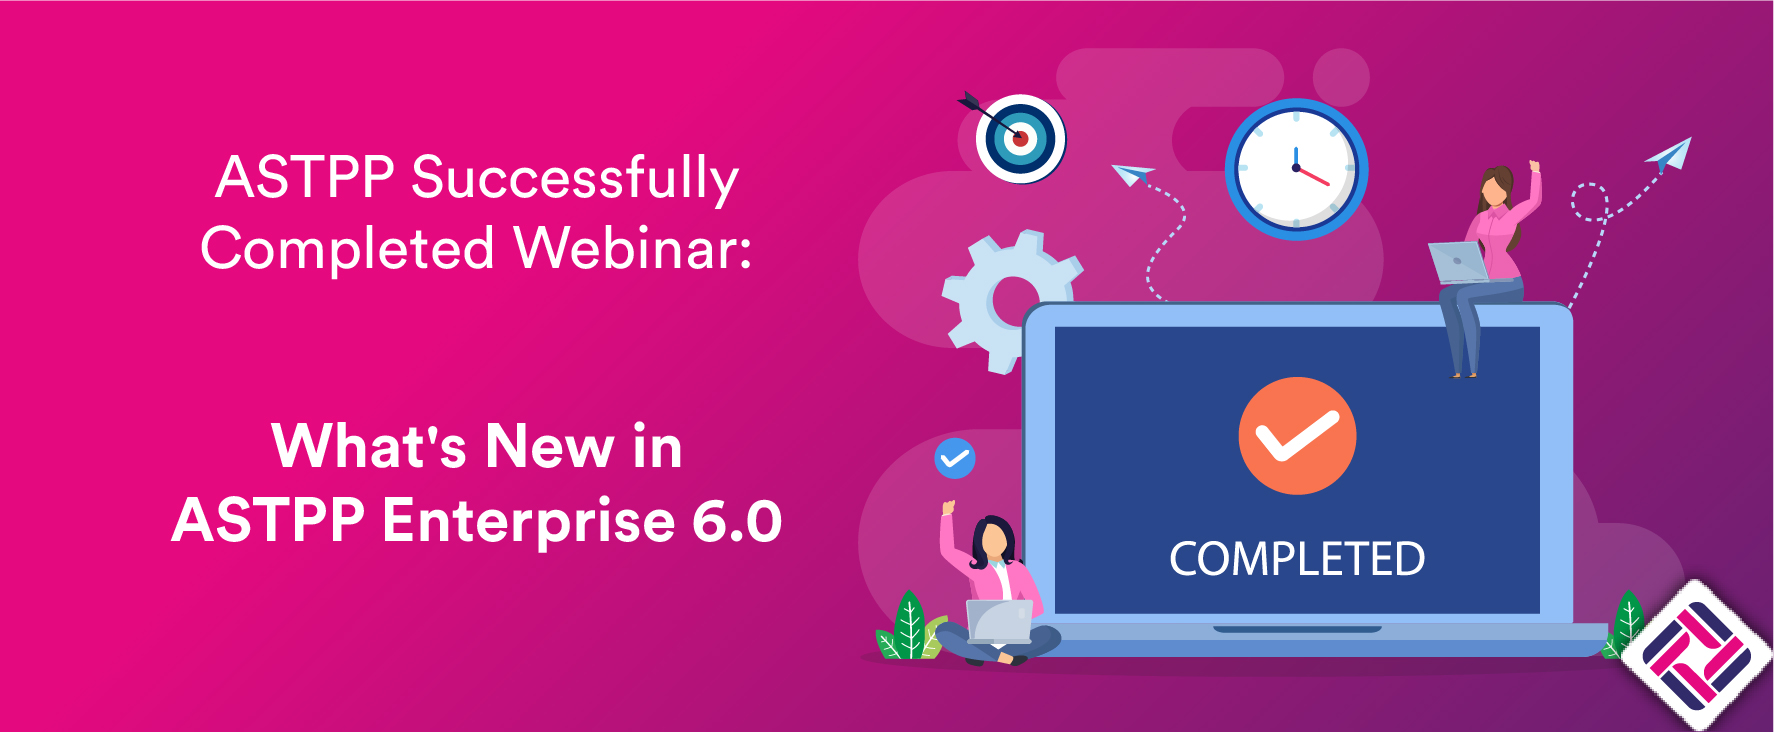 ASTPP Successfully Completed Webinar: What's New in ASTPP Enterprise 6.0?